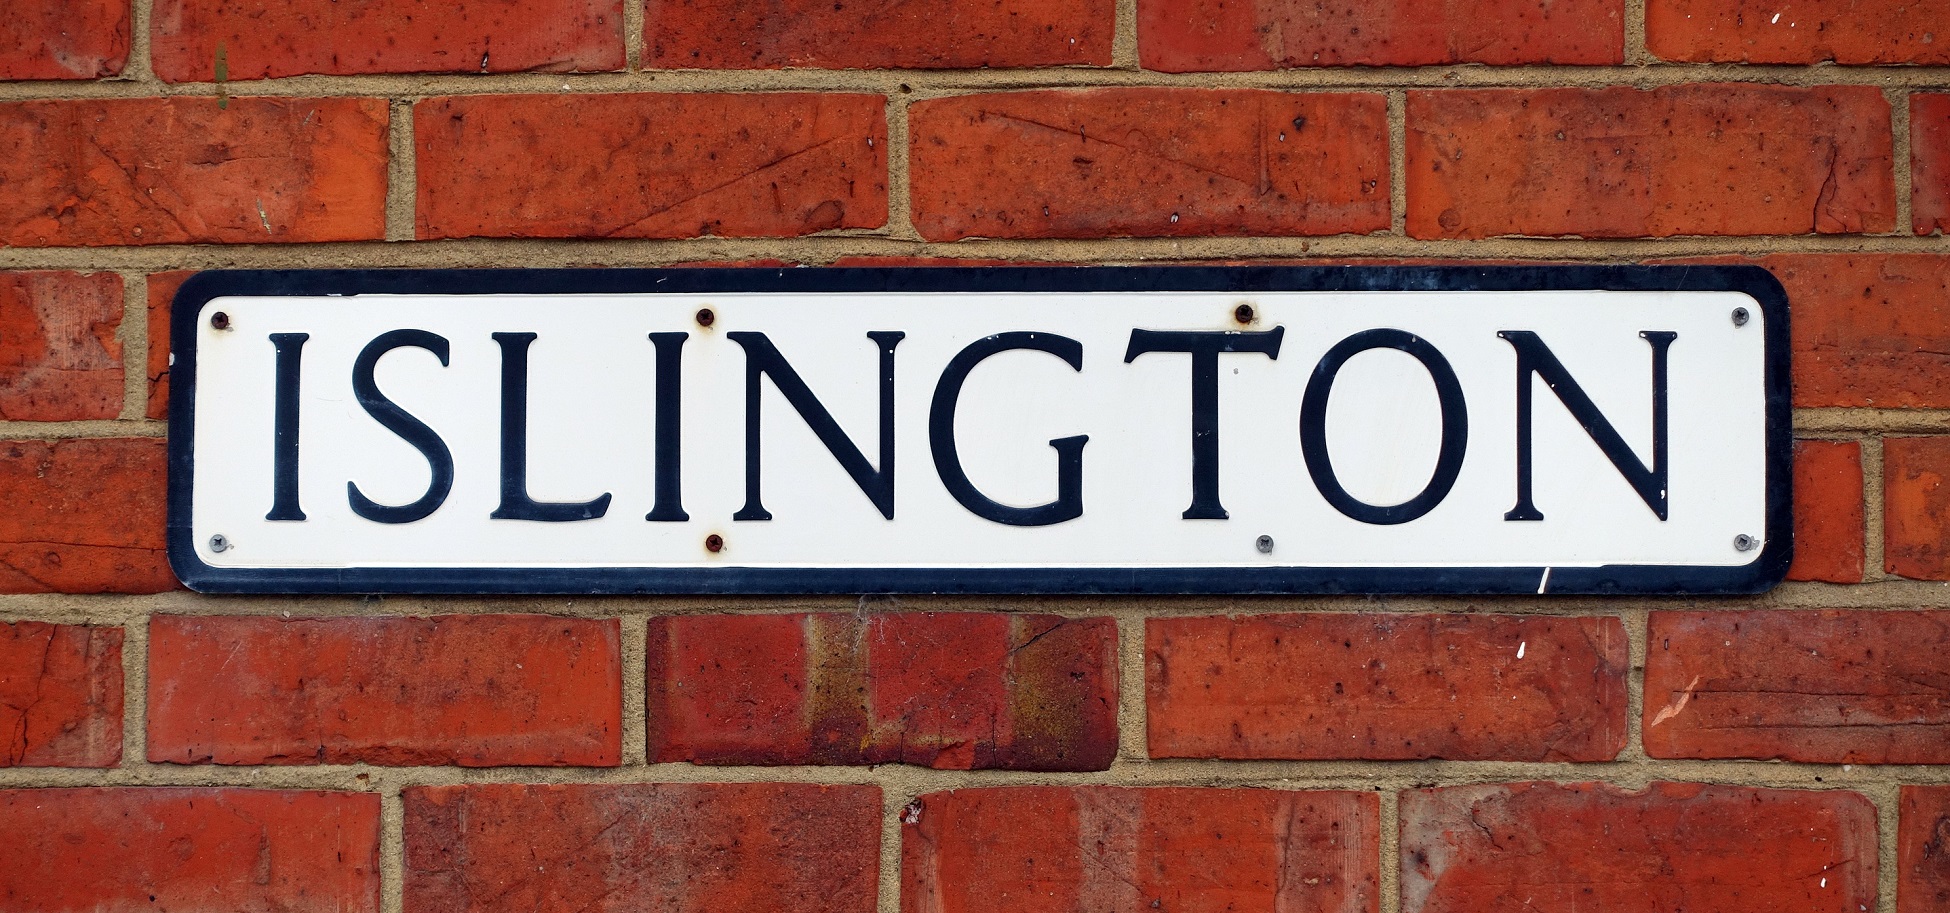 Everything you need to know about living in Islington